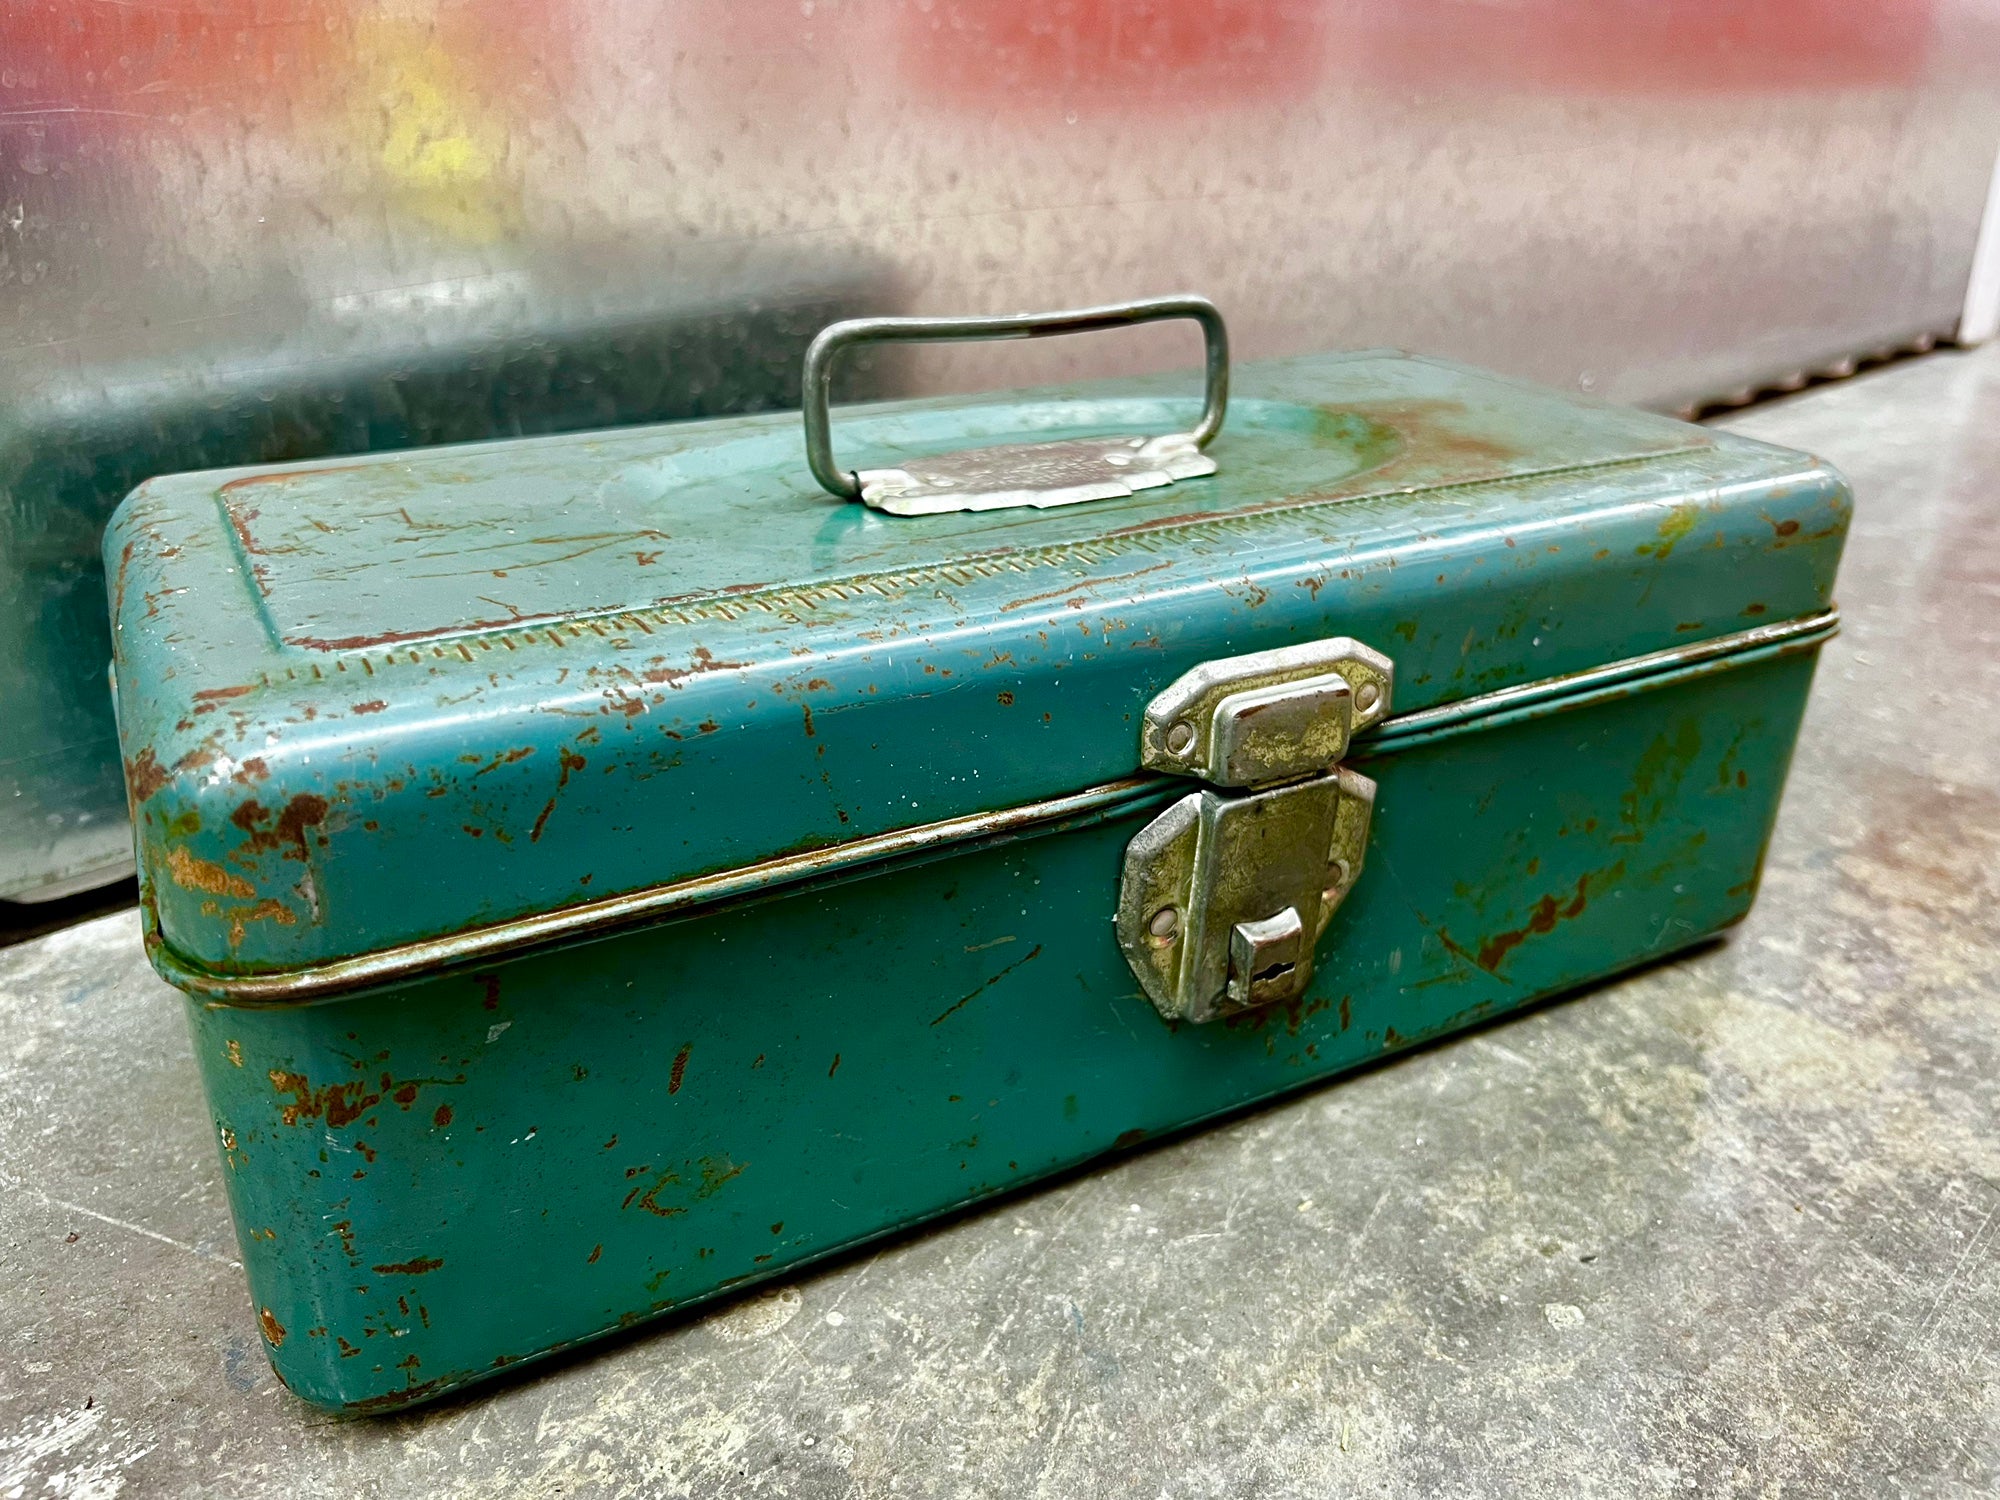 Vintage Plano Tackle Box 2 Tier Fold Out Tray Fishing Fishing Gear USA 海外  即決